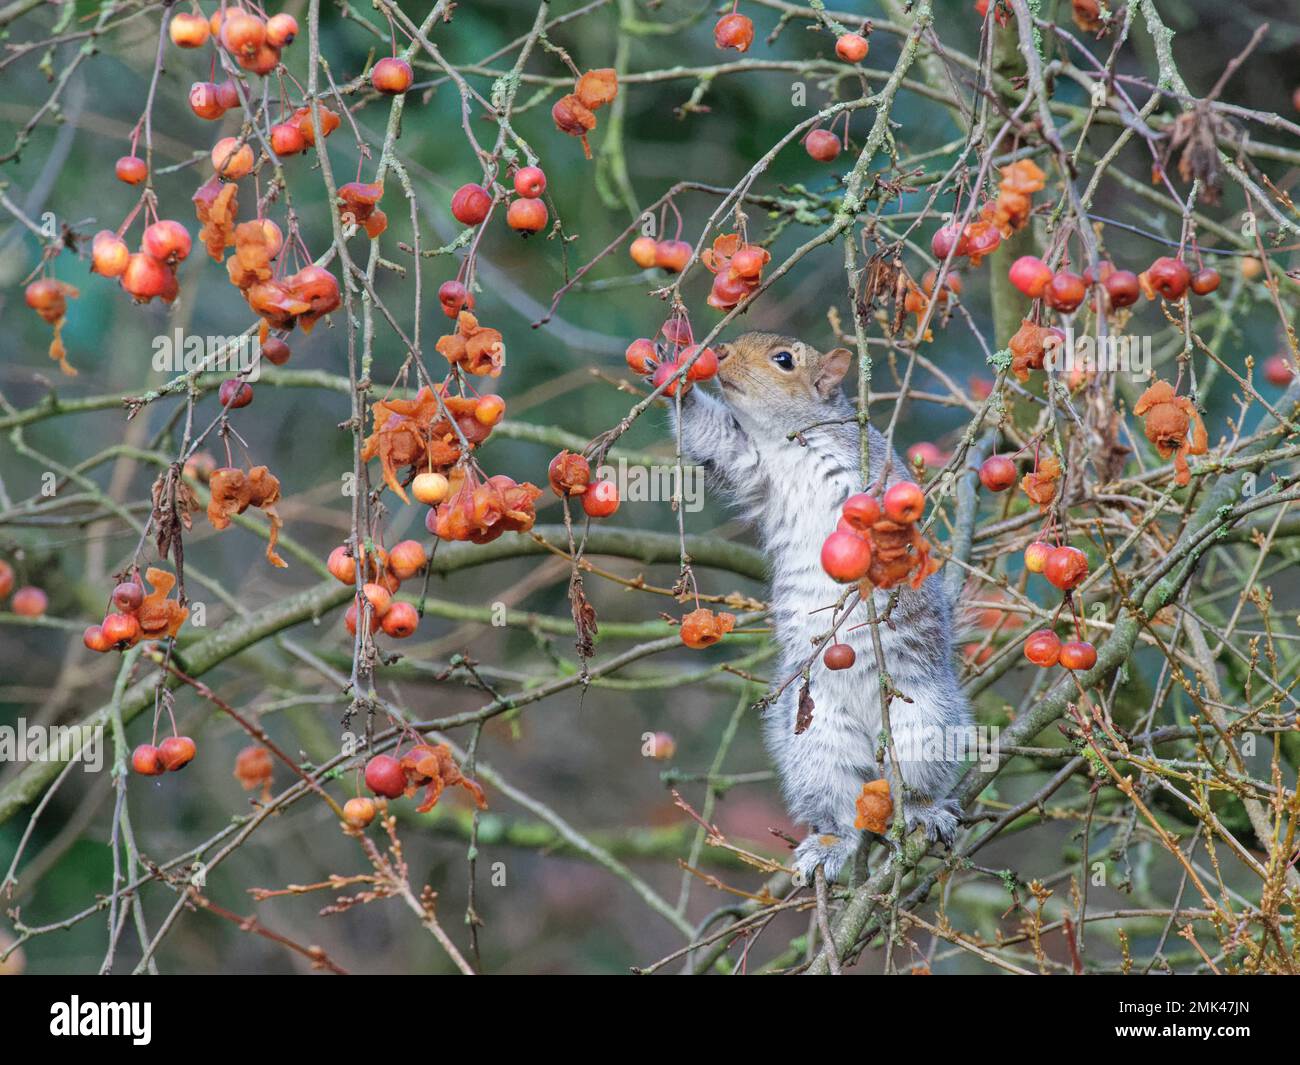 Grey squirrel (Sciurus carolinensis) grasping and sniffing Crab apples (Malus sylvestris) to check if if they are ripe for eating, Wiltshire garden, U Stock Photo